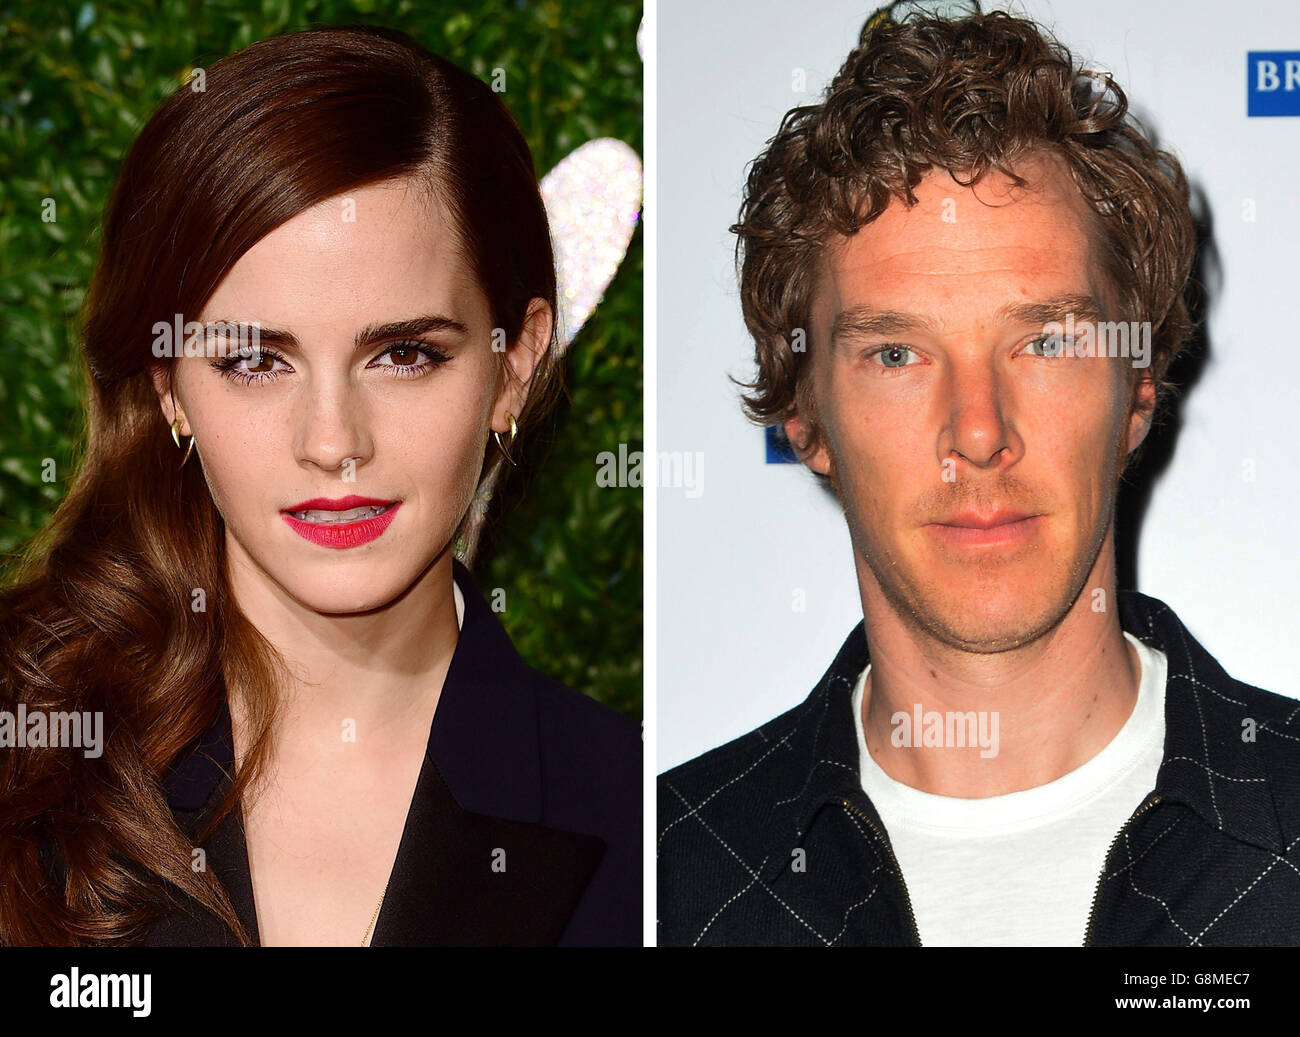 File photos of Emma Watson (left), and Benedict Cumberbatch who have been handed new roles - as visiting fellows at Oxford University. Stock Photo